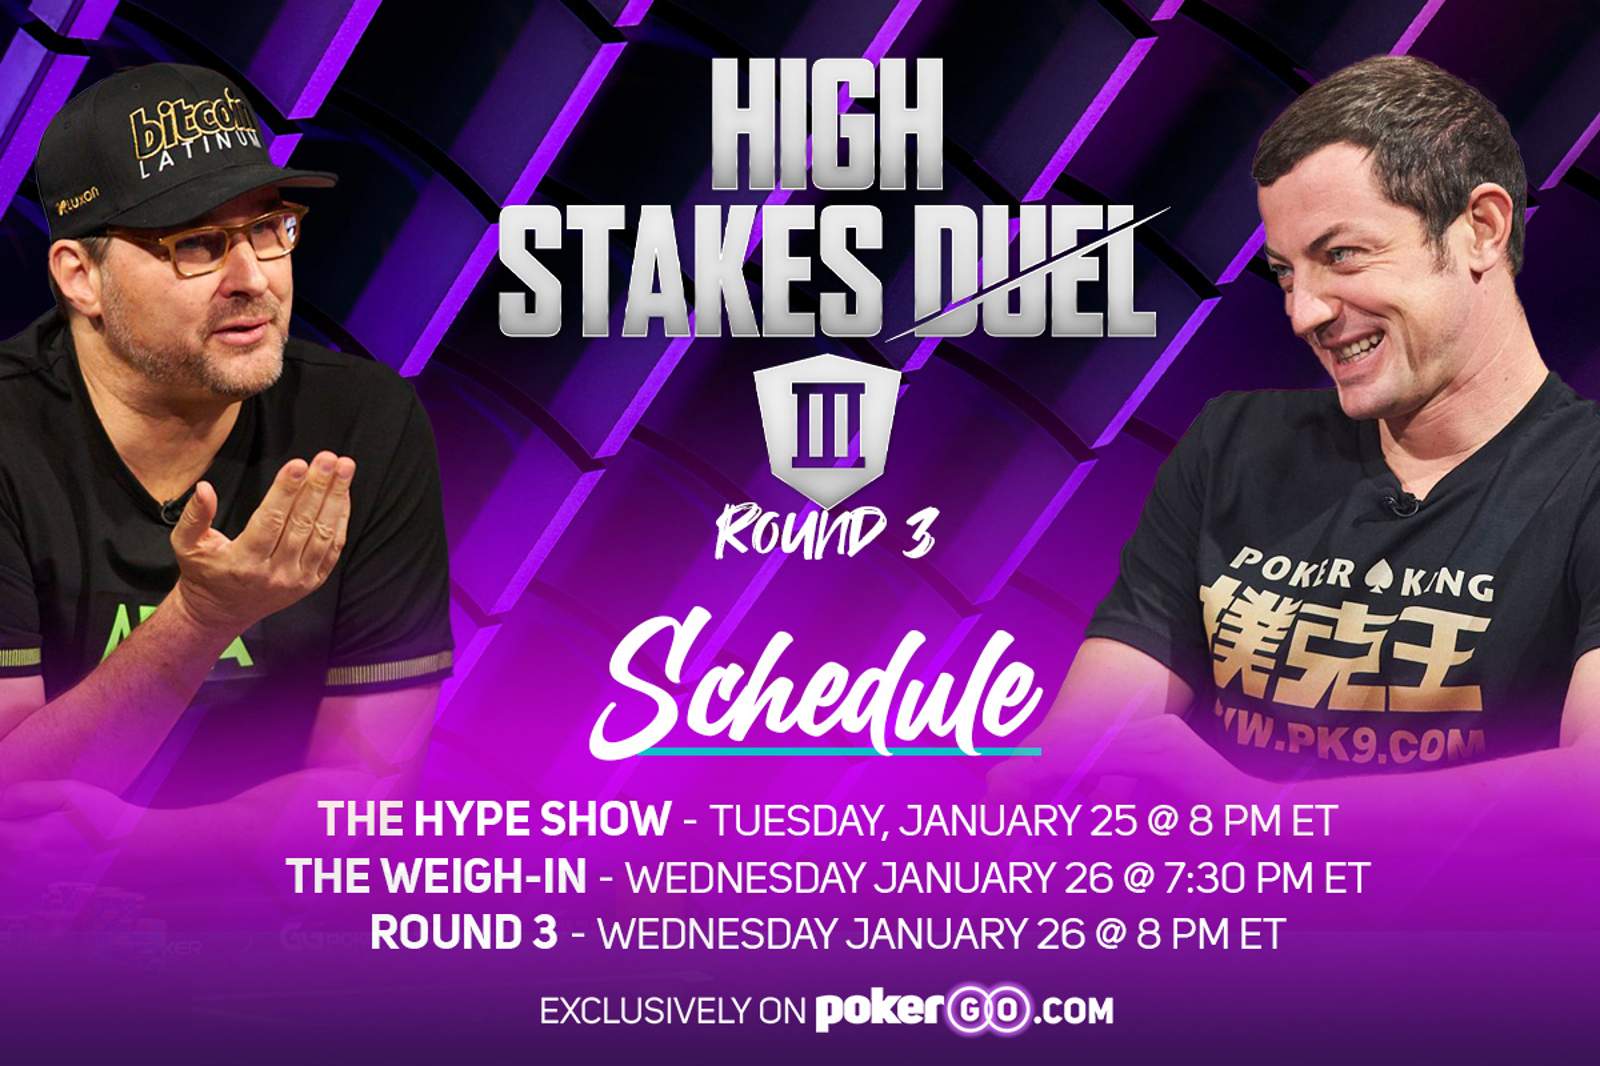 Round 3 of High Stakes Duel III Schedule - 3 Different Shows Over 2 Nights